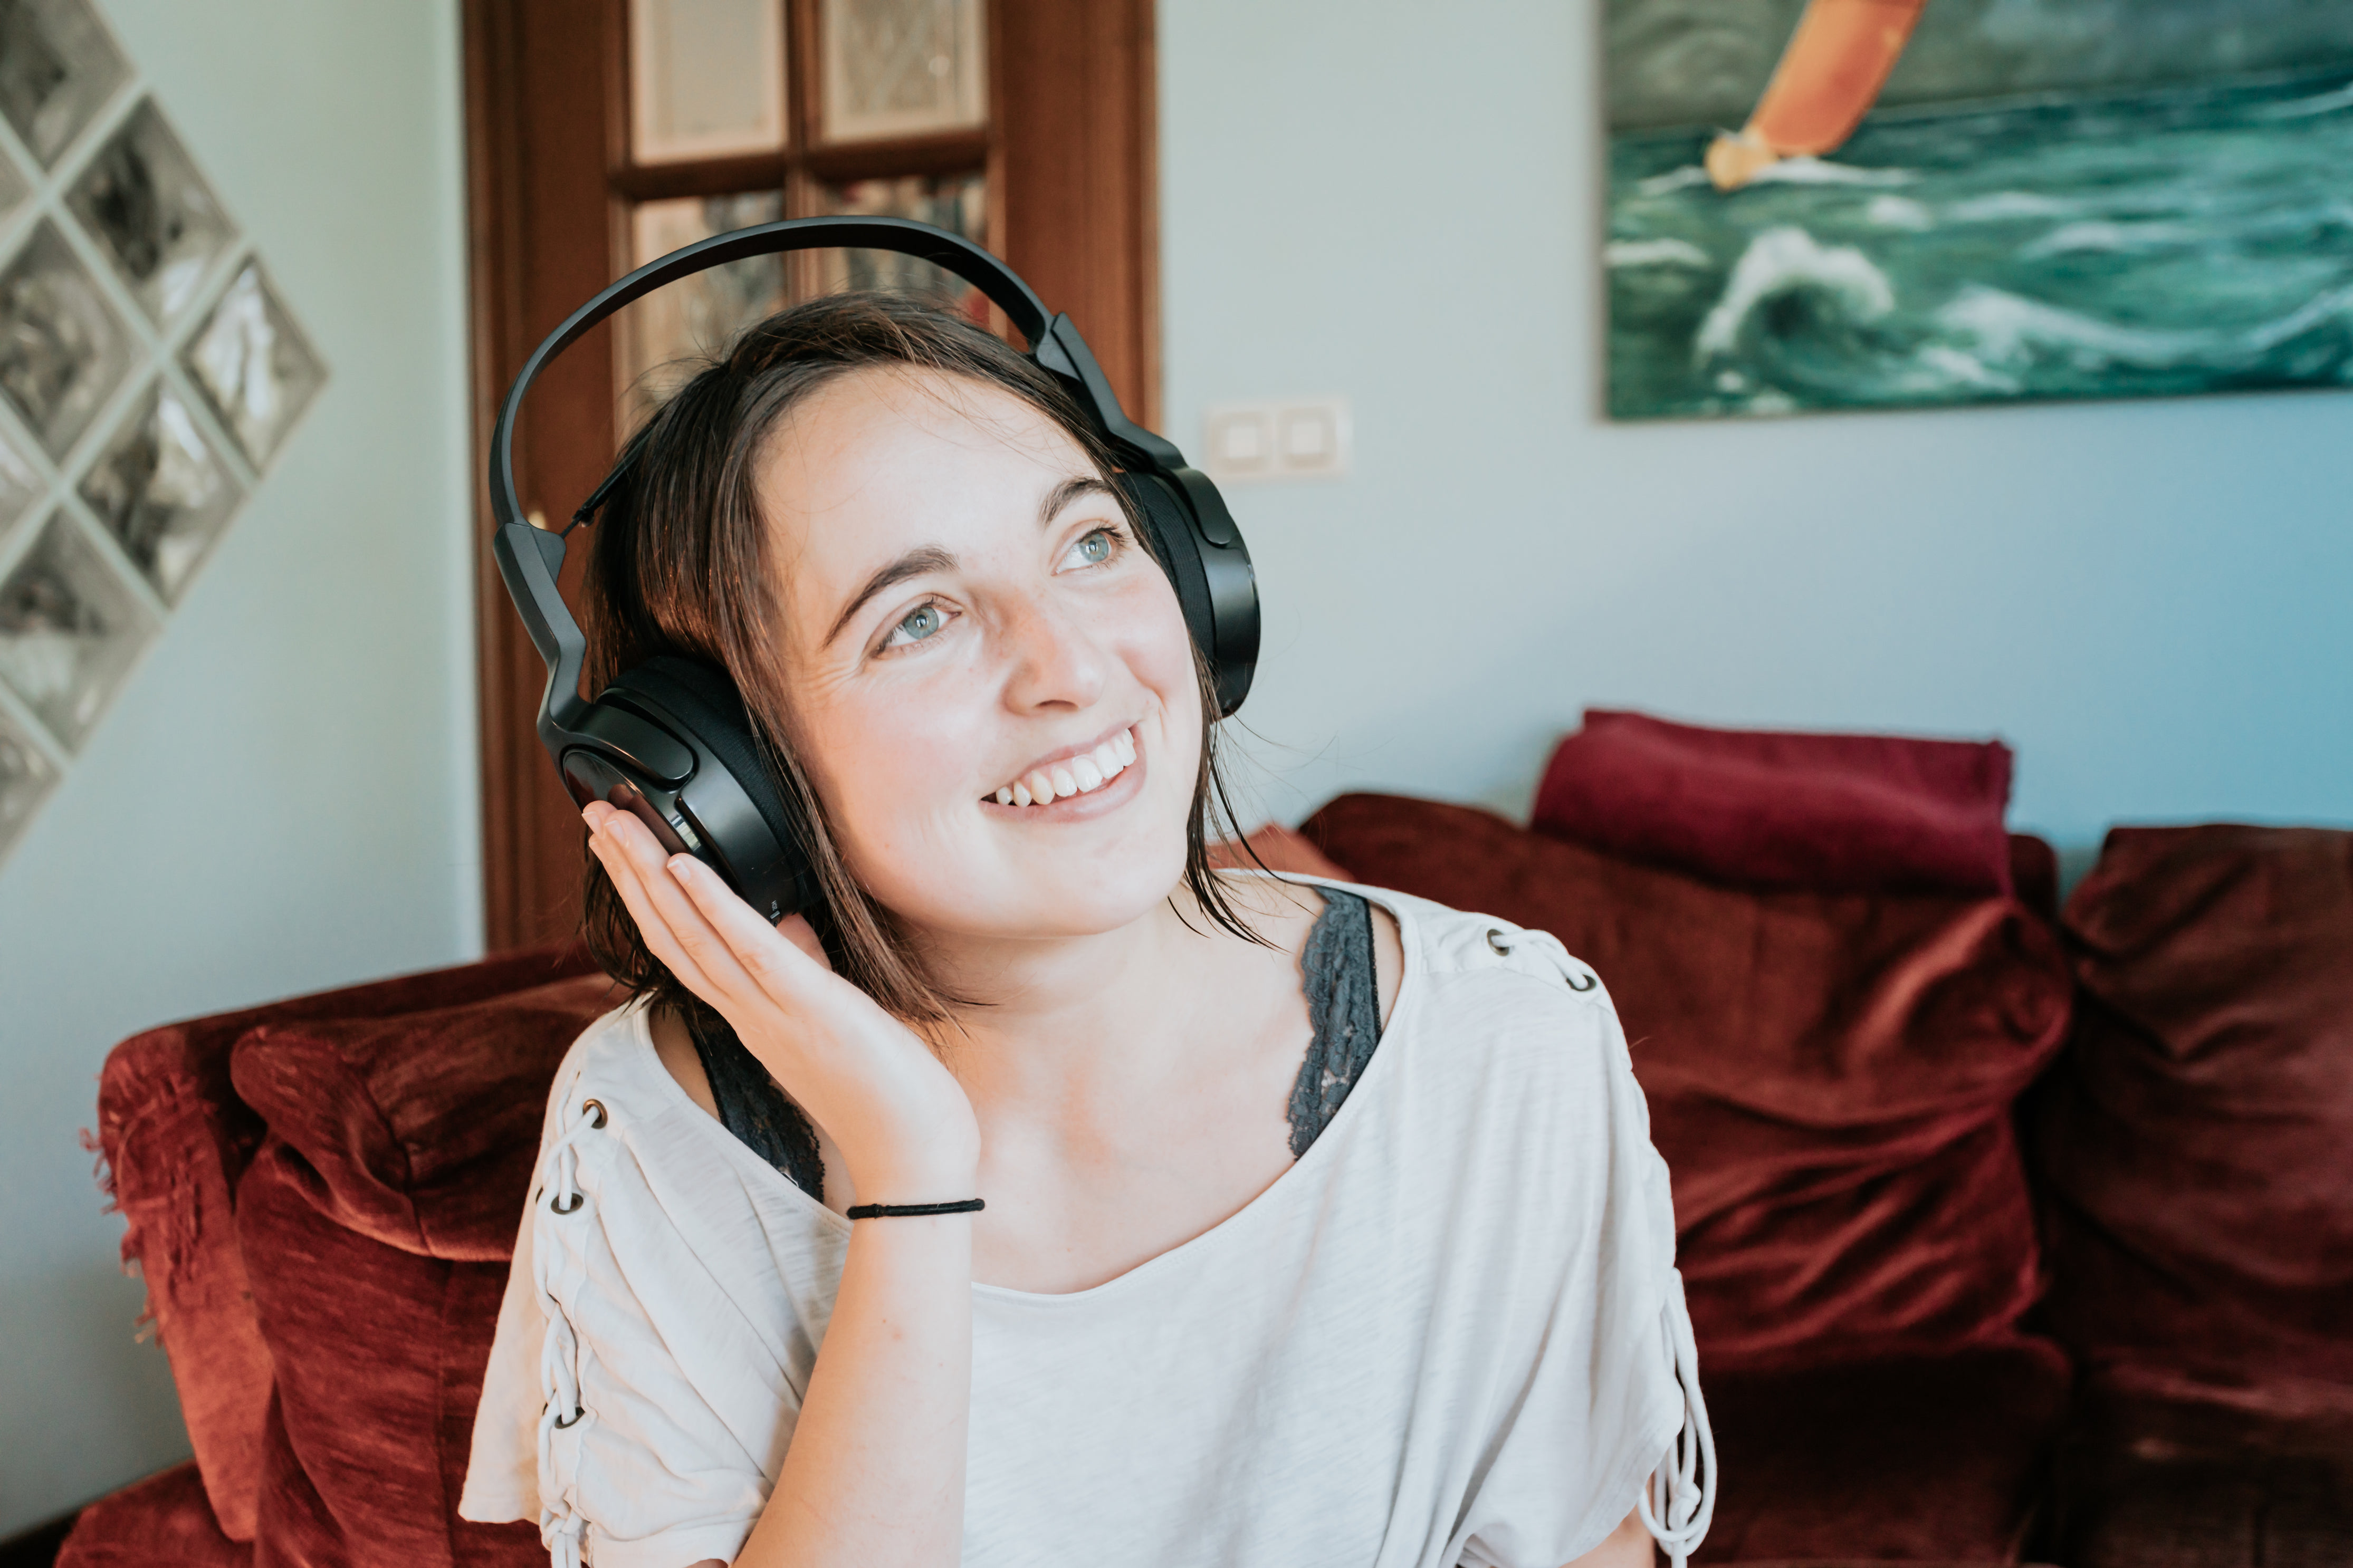 woman-wears-headphones-with-one-hand-up-smiling.jpg